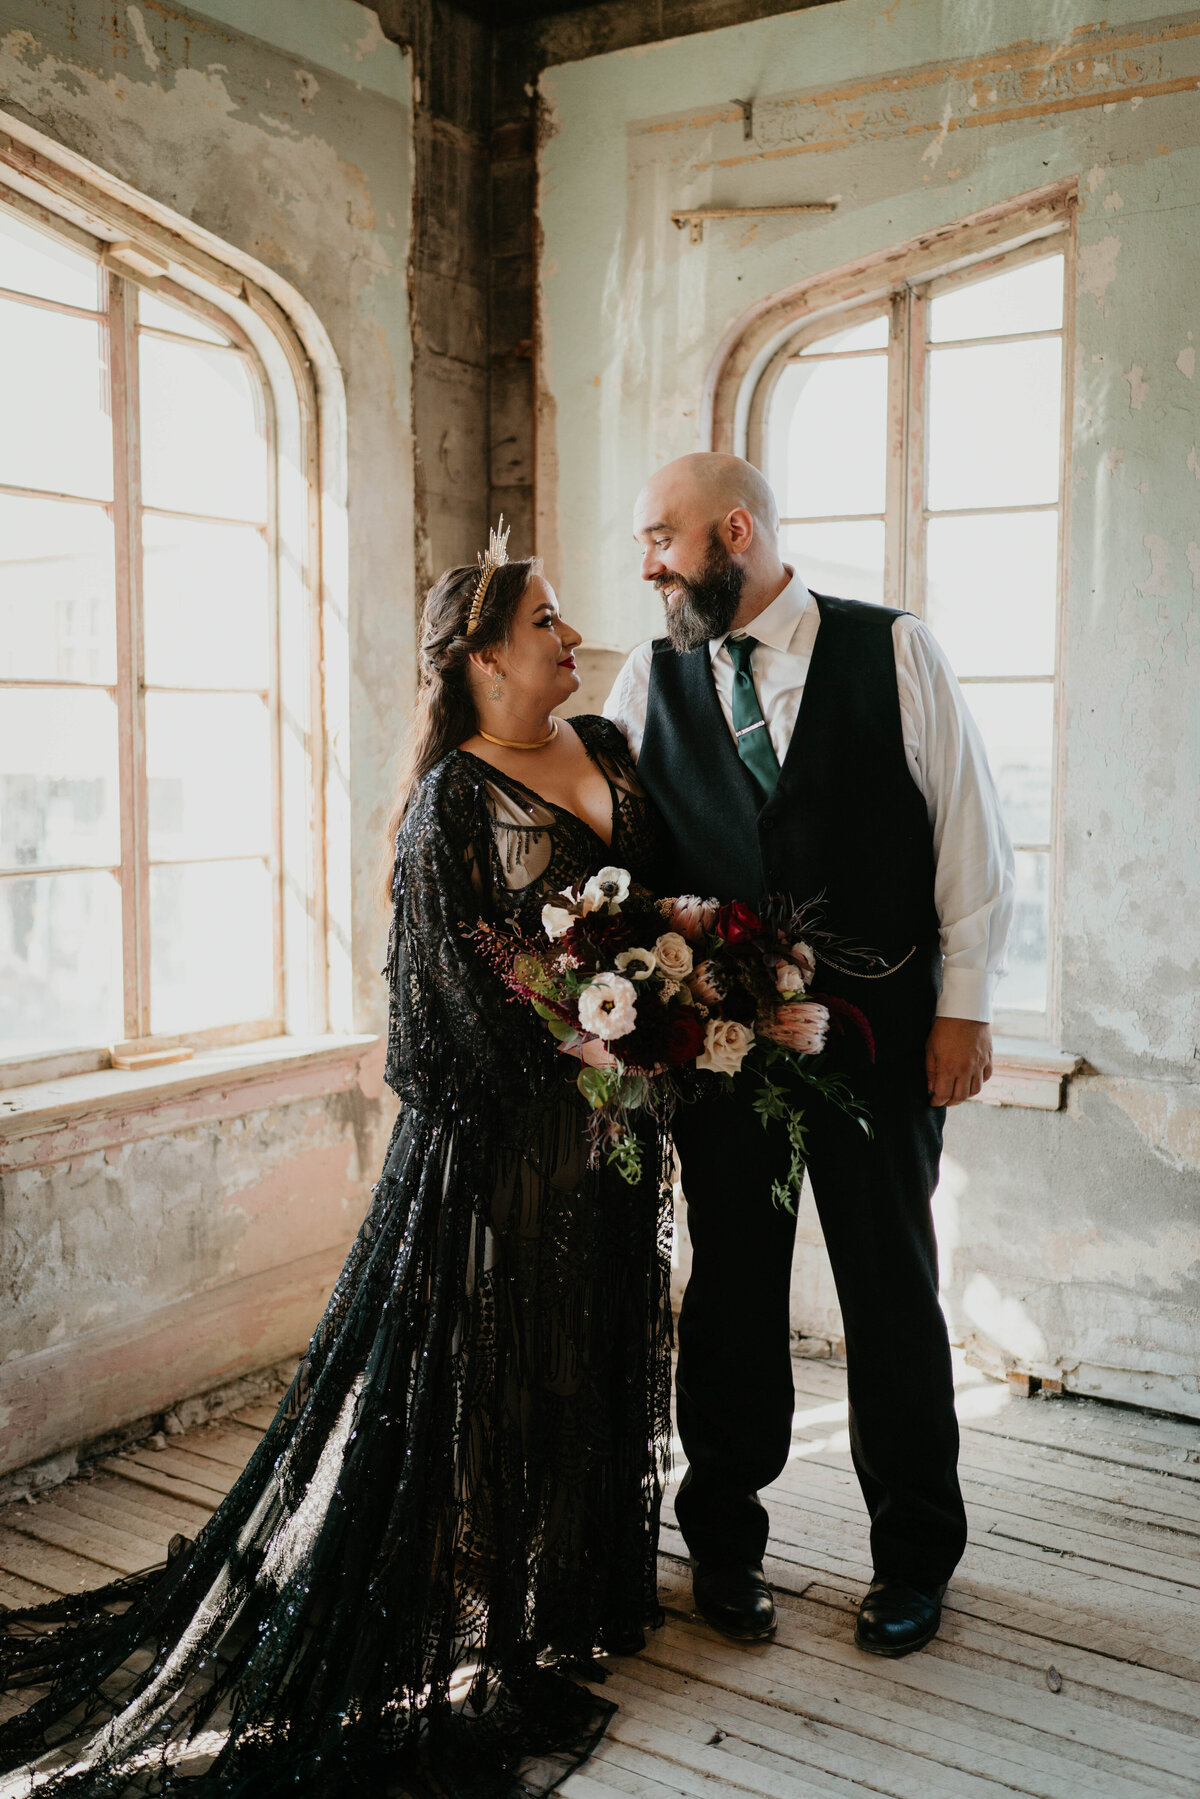 Bride in black dress and groom smiling at each other in The Ruins at the Astor